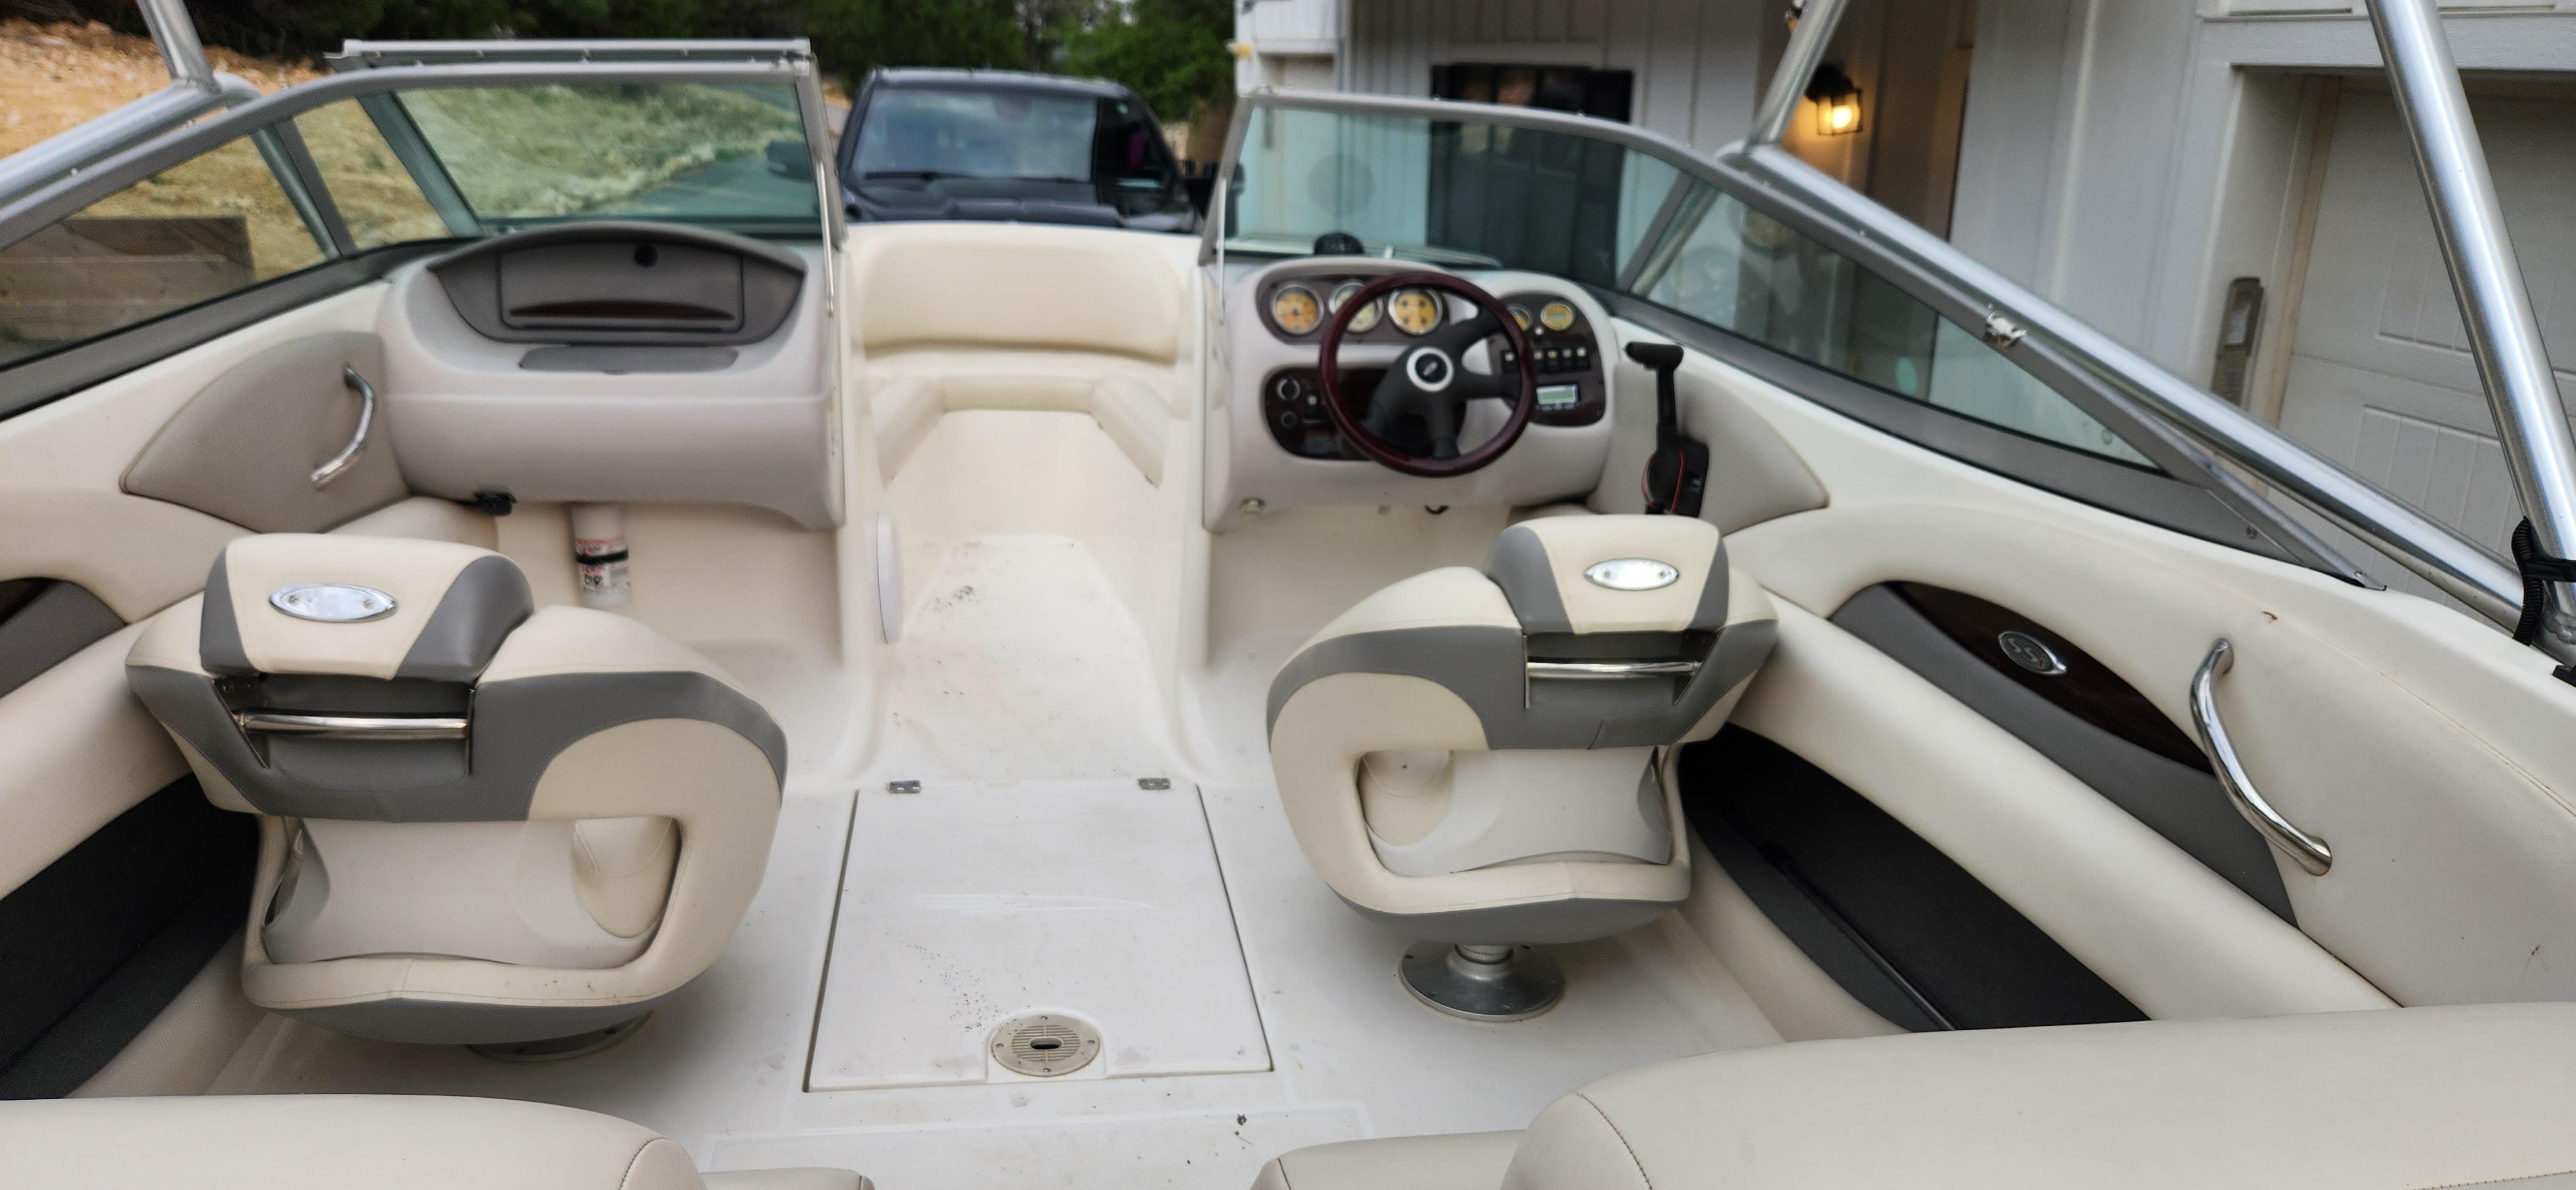 2006 Chaparral 210 SS